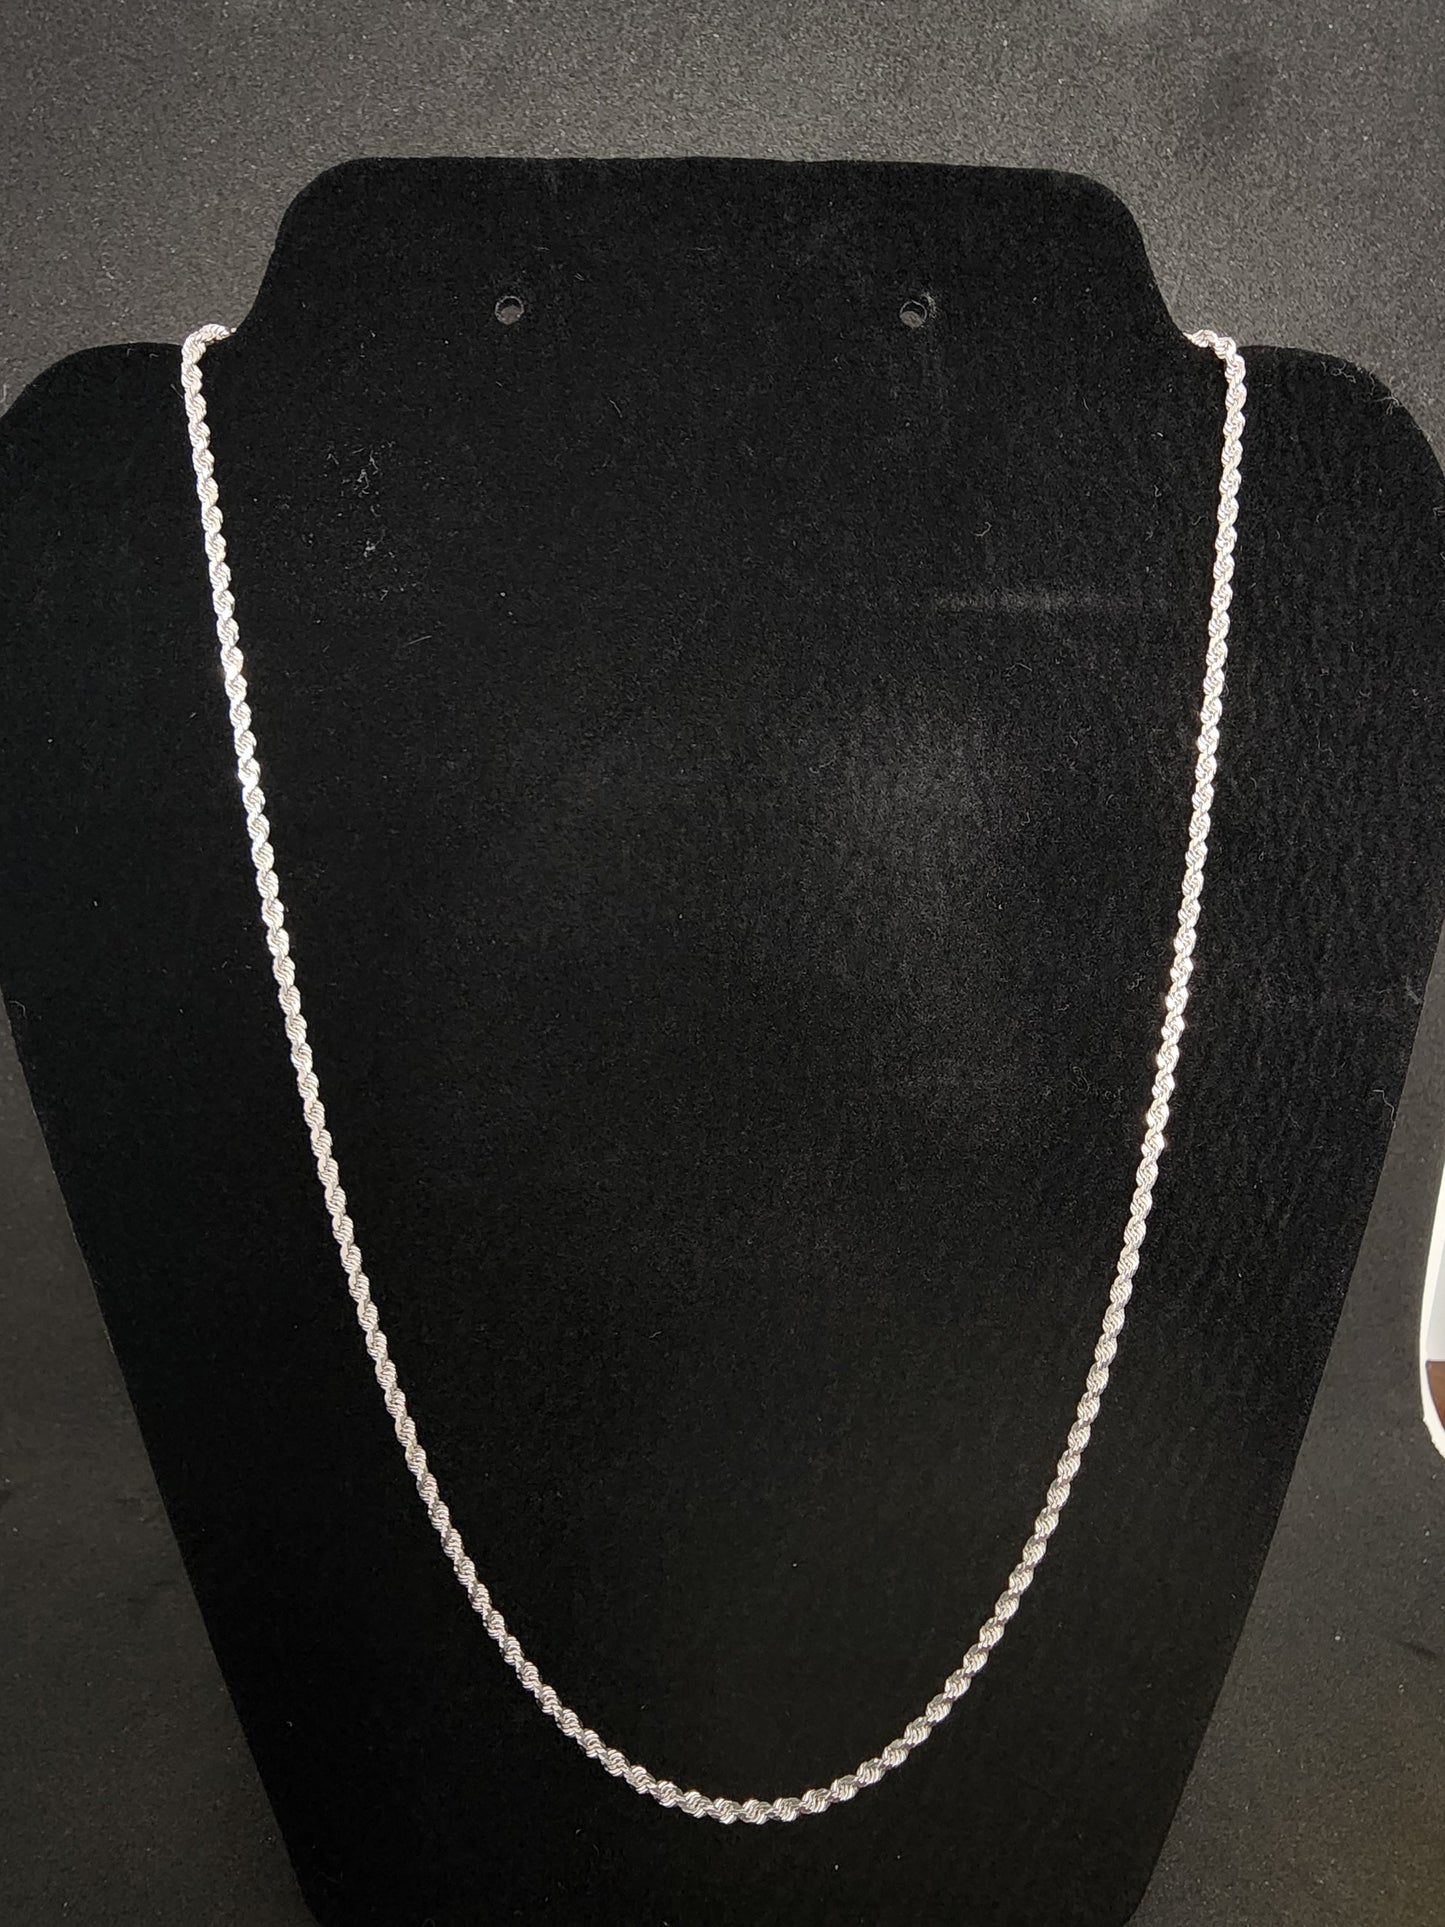 Diamond Cut Rope Chain - 10k Solid White Gold - 20in long - 2mm